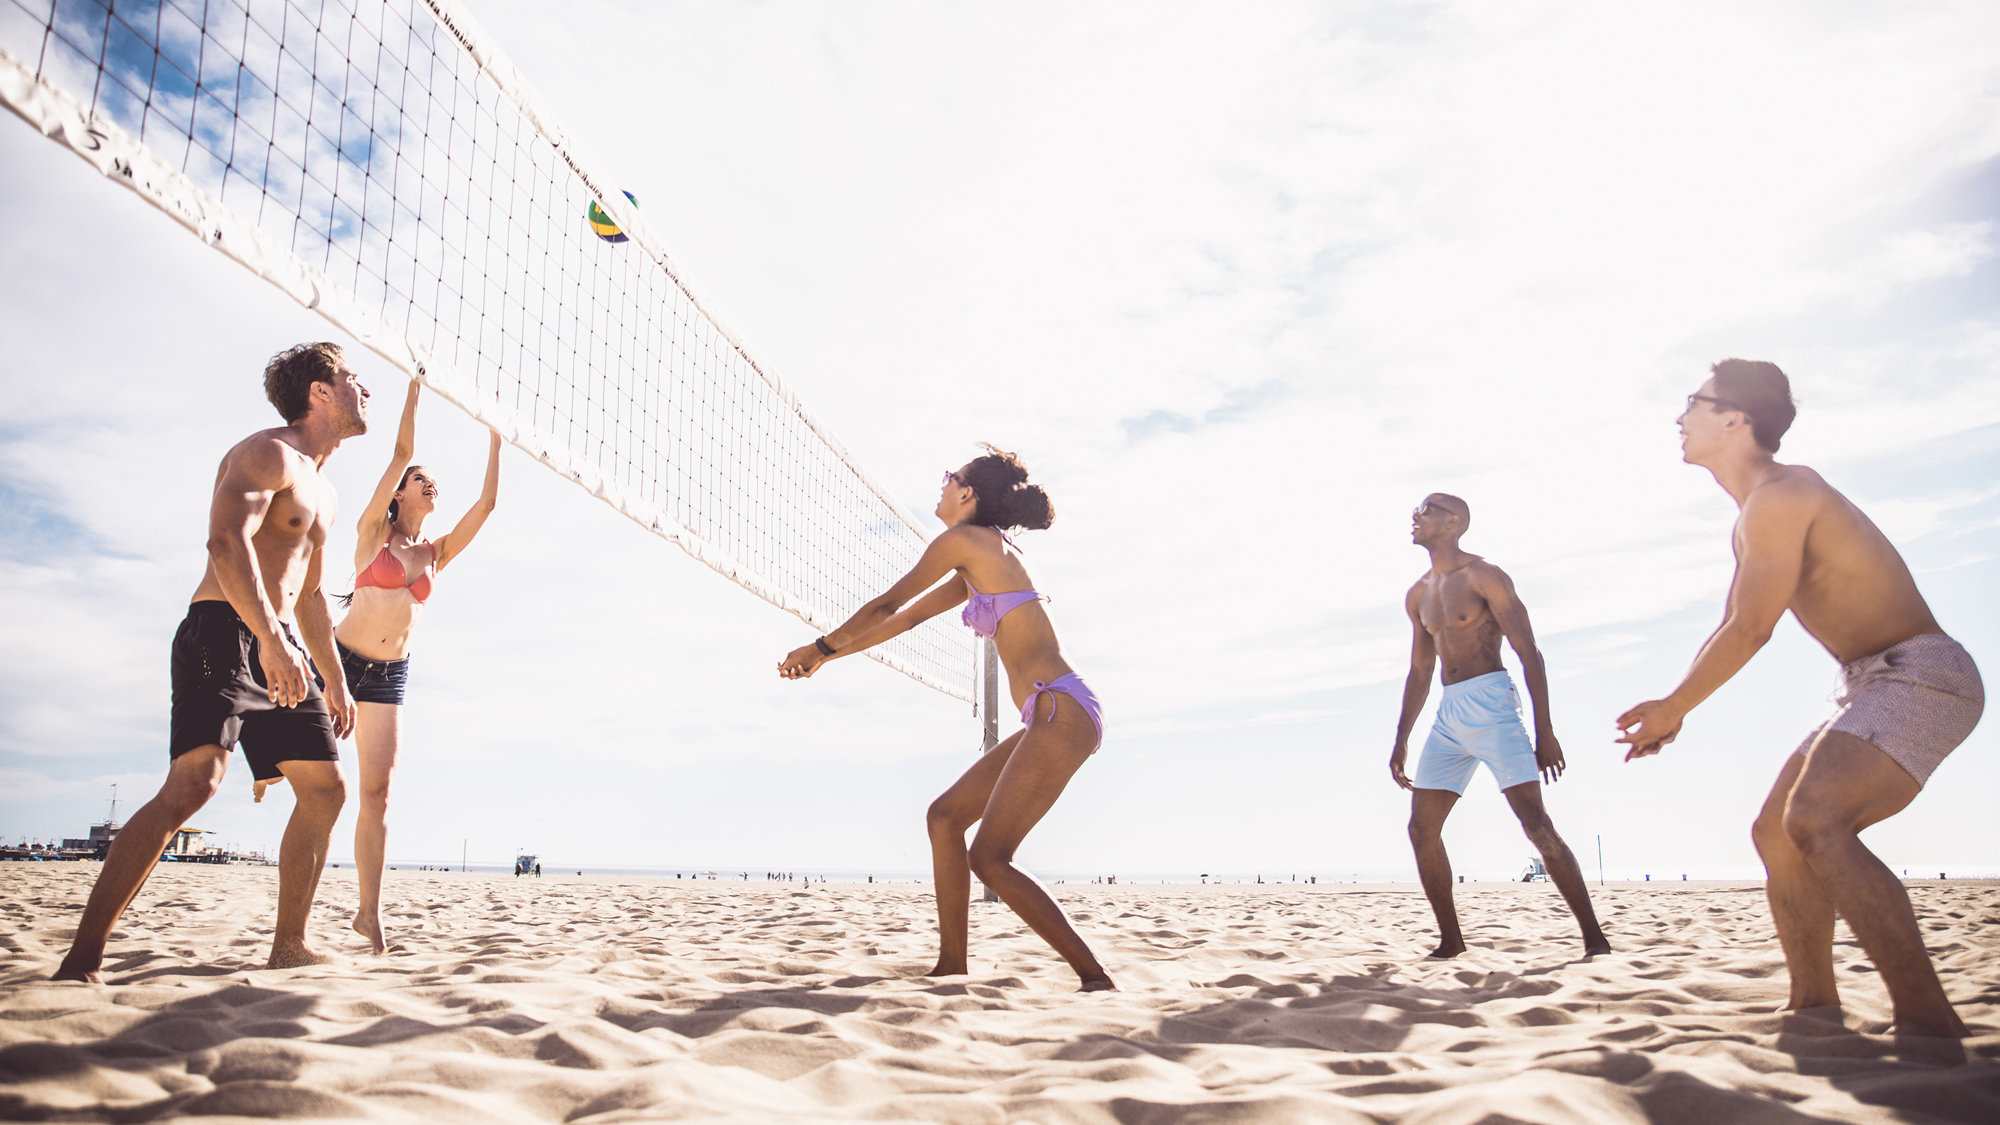 Group of people playing volleyball on sandy beach with large net at Mar Monte Hotel in Santa Barbara, CA